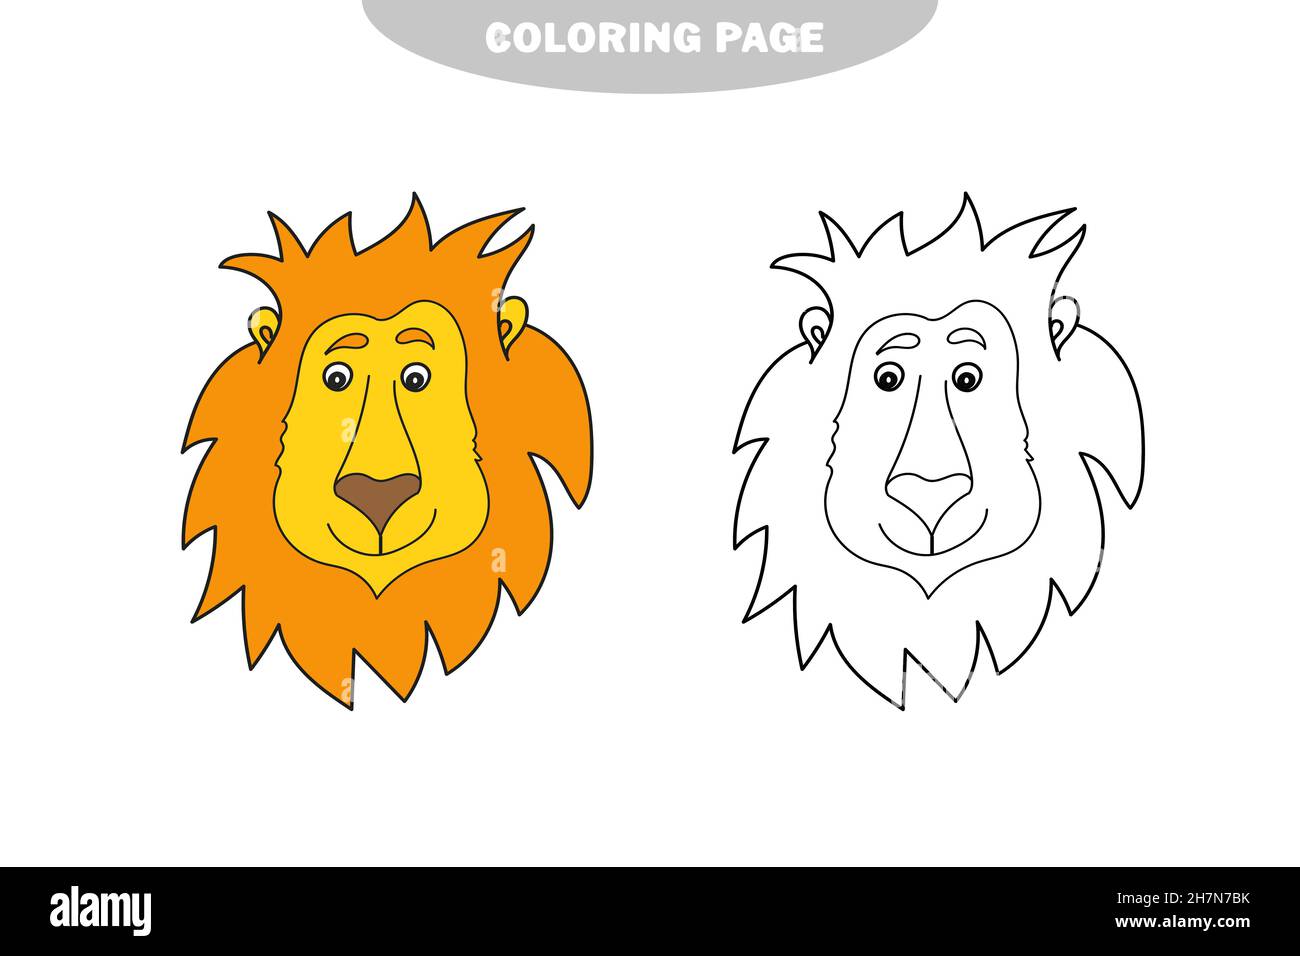 66 Cute Lion Coloring Pages  HD